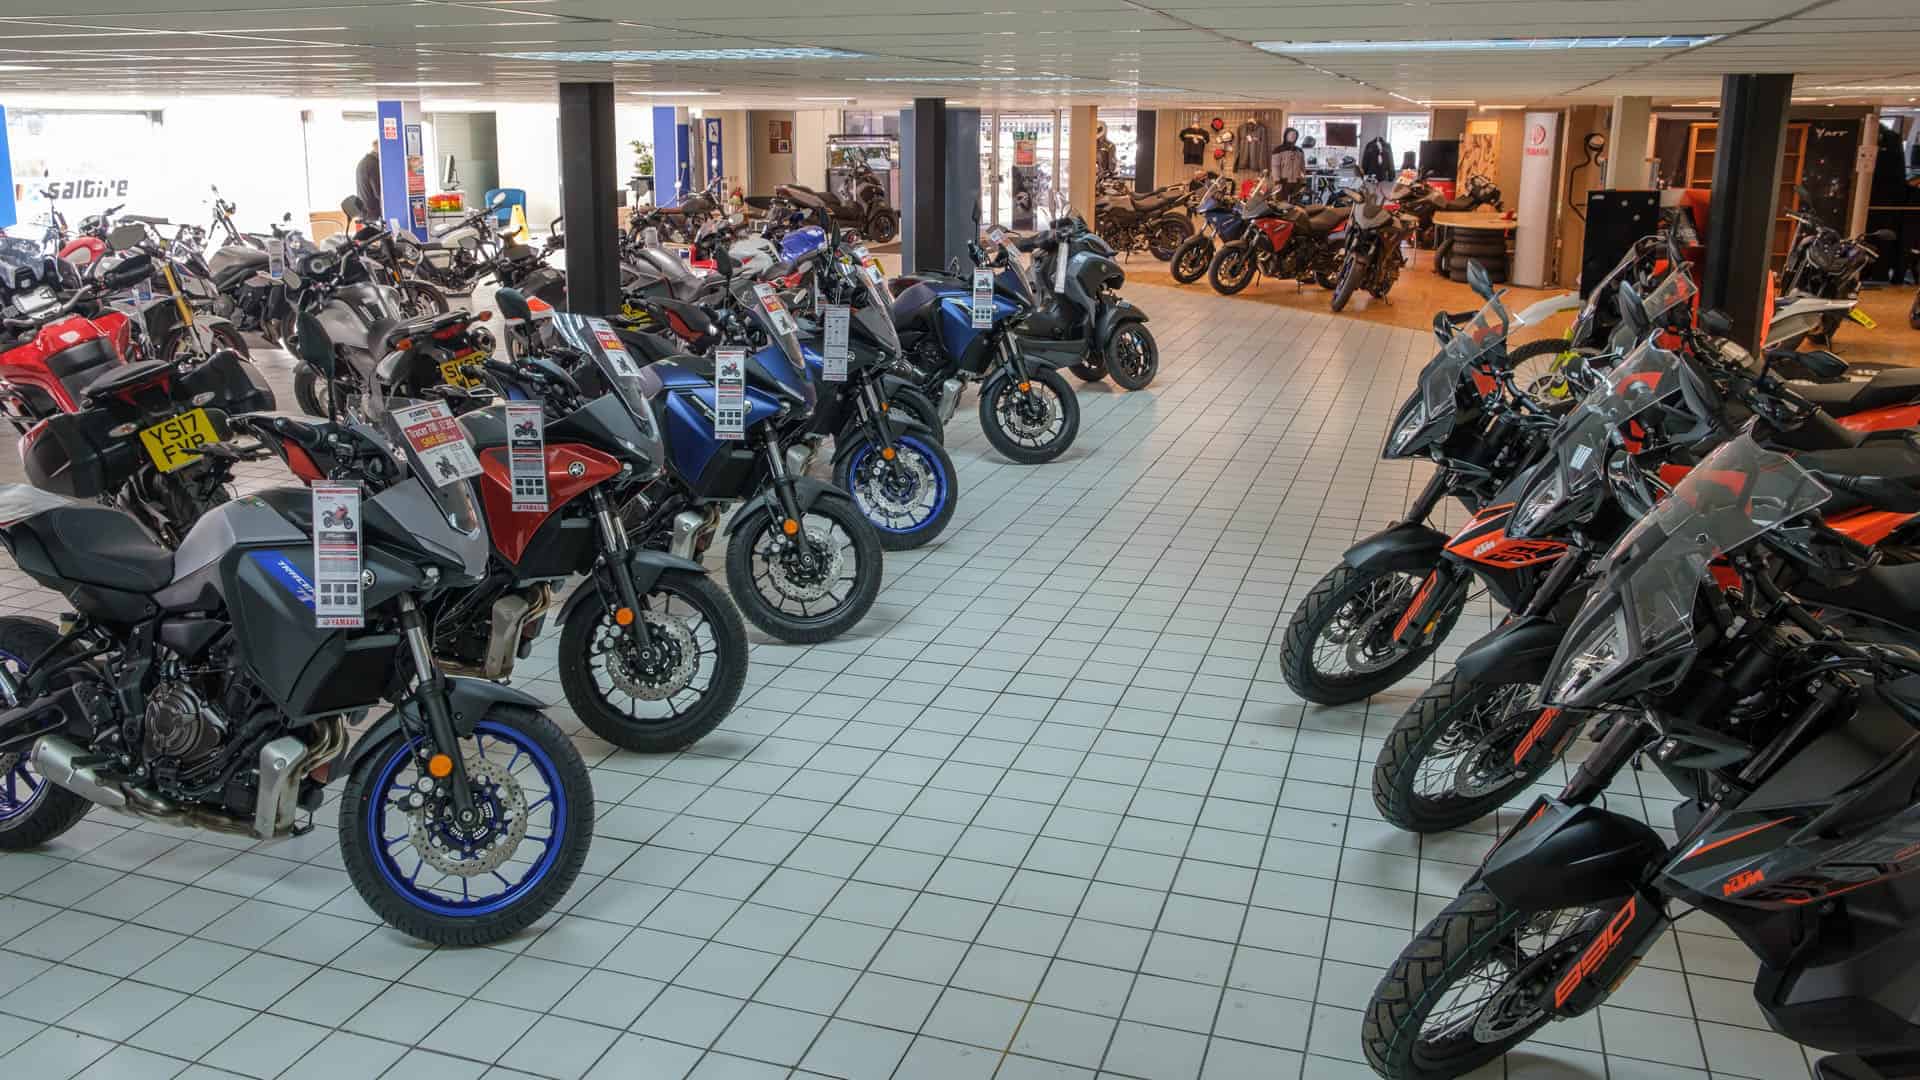 shop with motorcycles on display